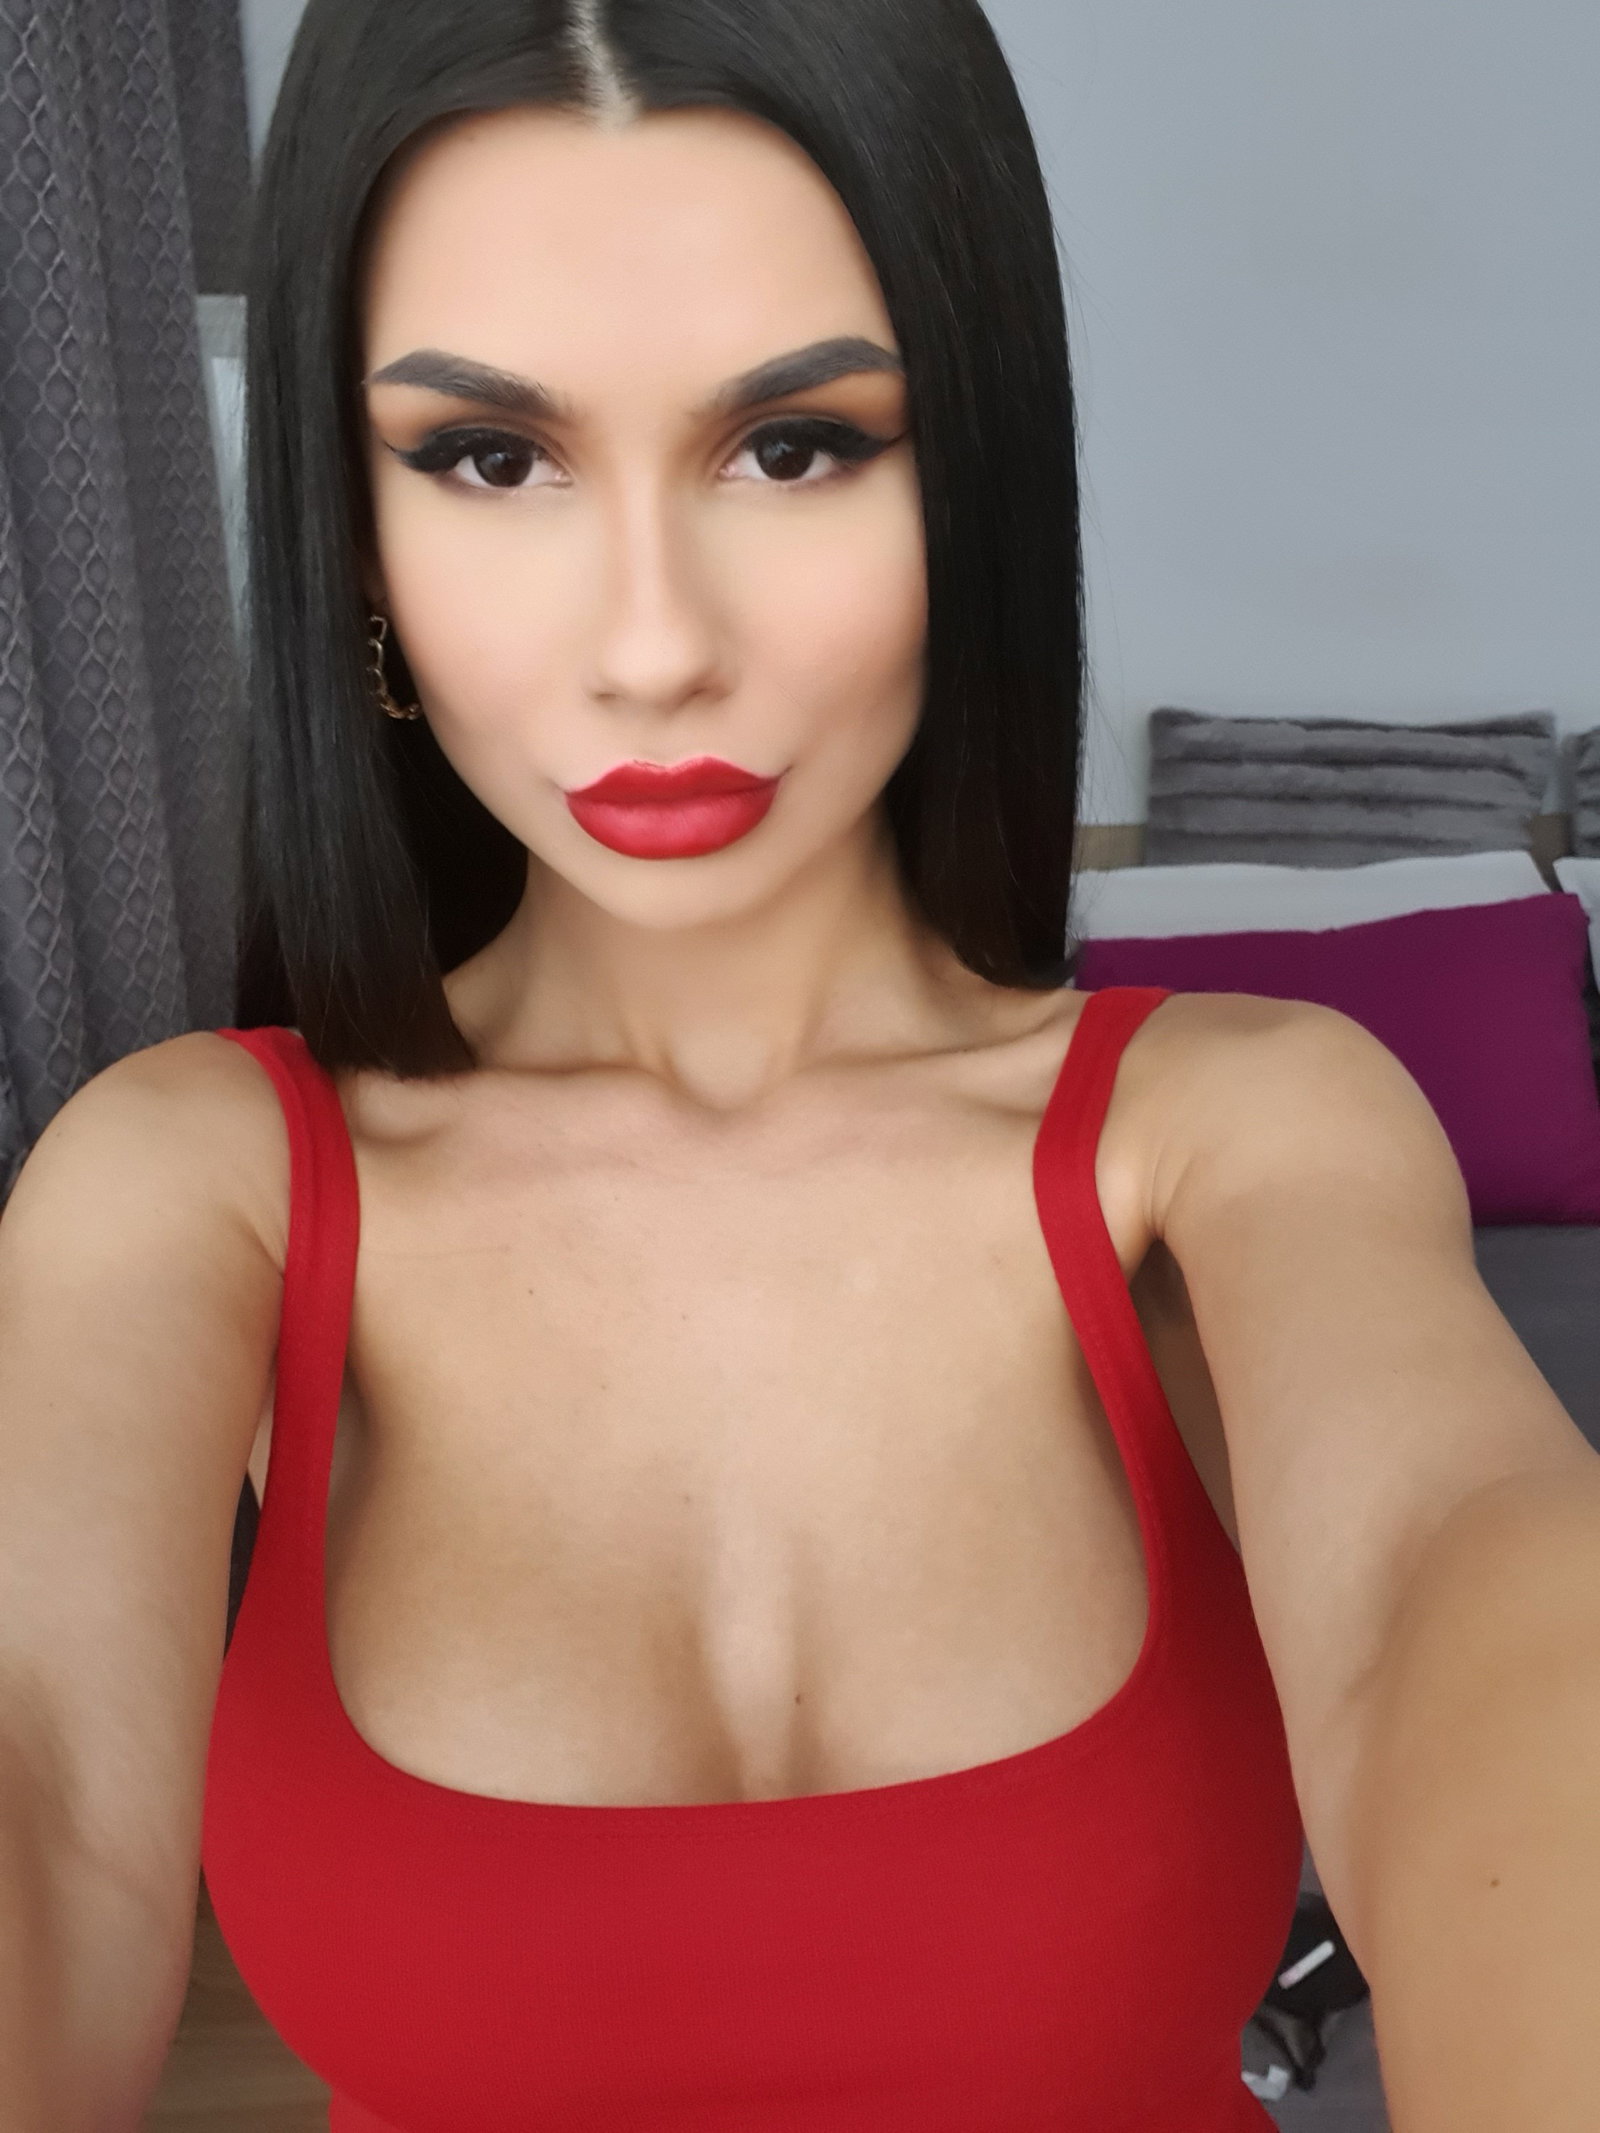 Photo by SereneSophie with the username @SereneSophie, who is a star user,  August 28, 2019 at 6:30 PM and the text says '#LifeinRed #GirlPower #WeTheBestModels

Red💄💋will always grab attention... plus it's sexy👠don't you think?!

⚡LIVE💦 on bit.ly/SereneSophie🔝'